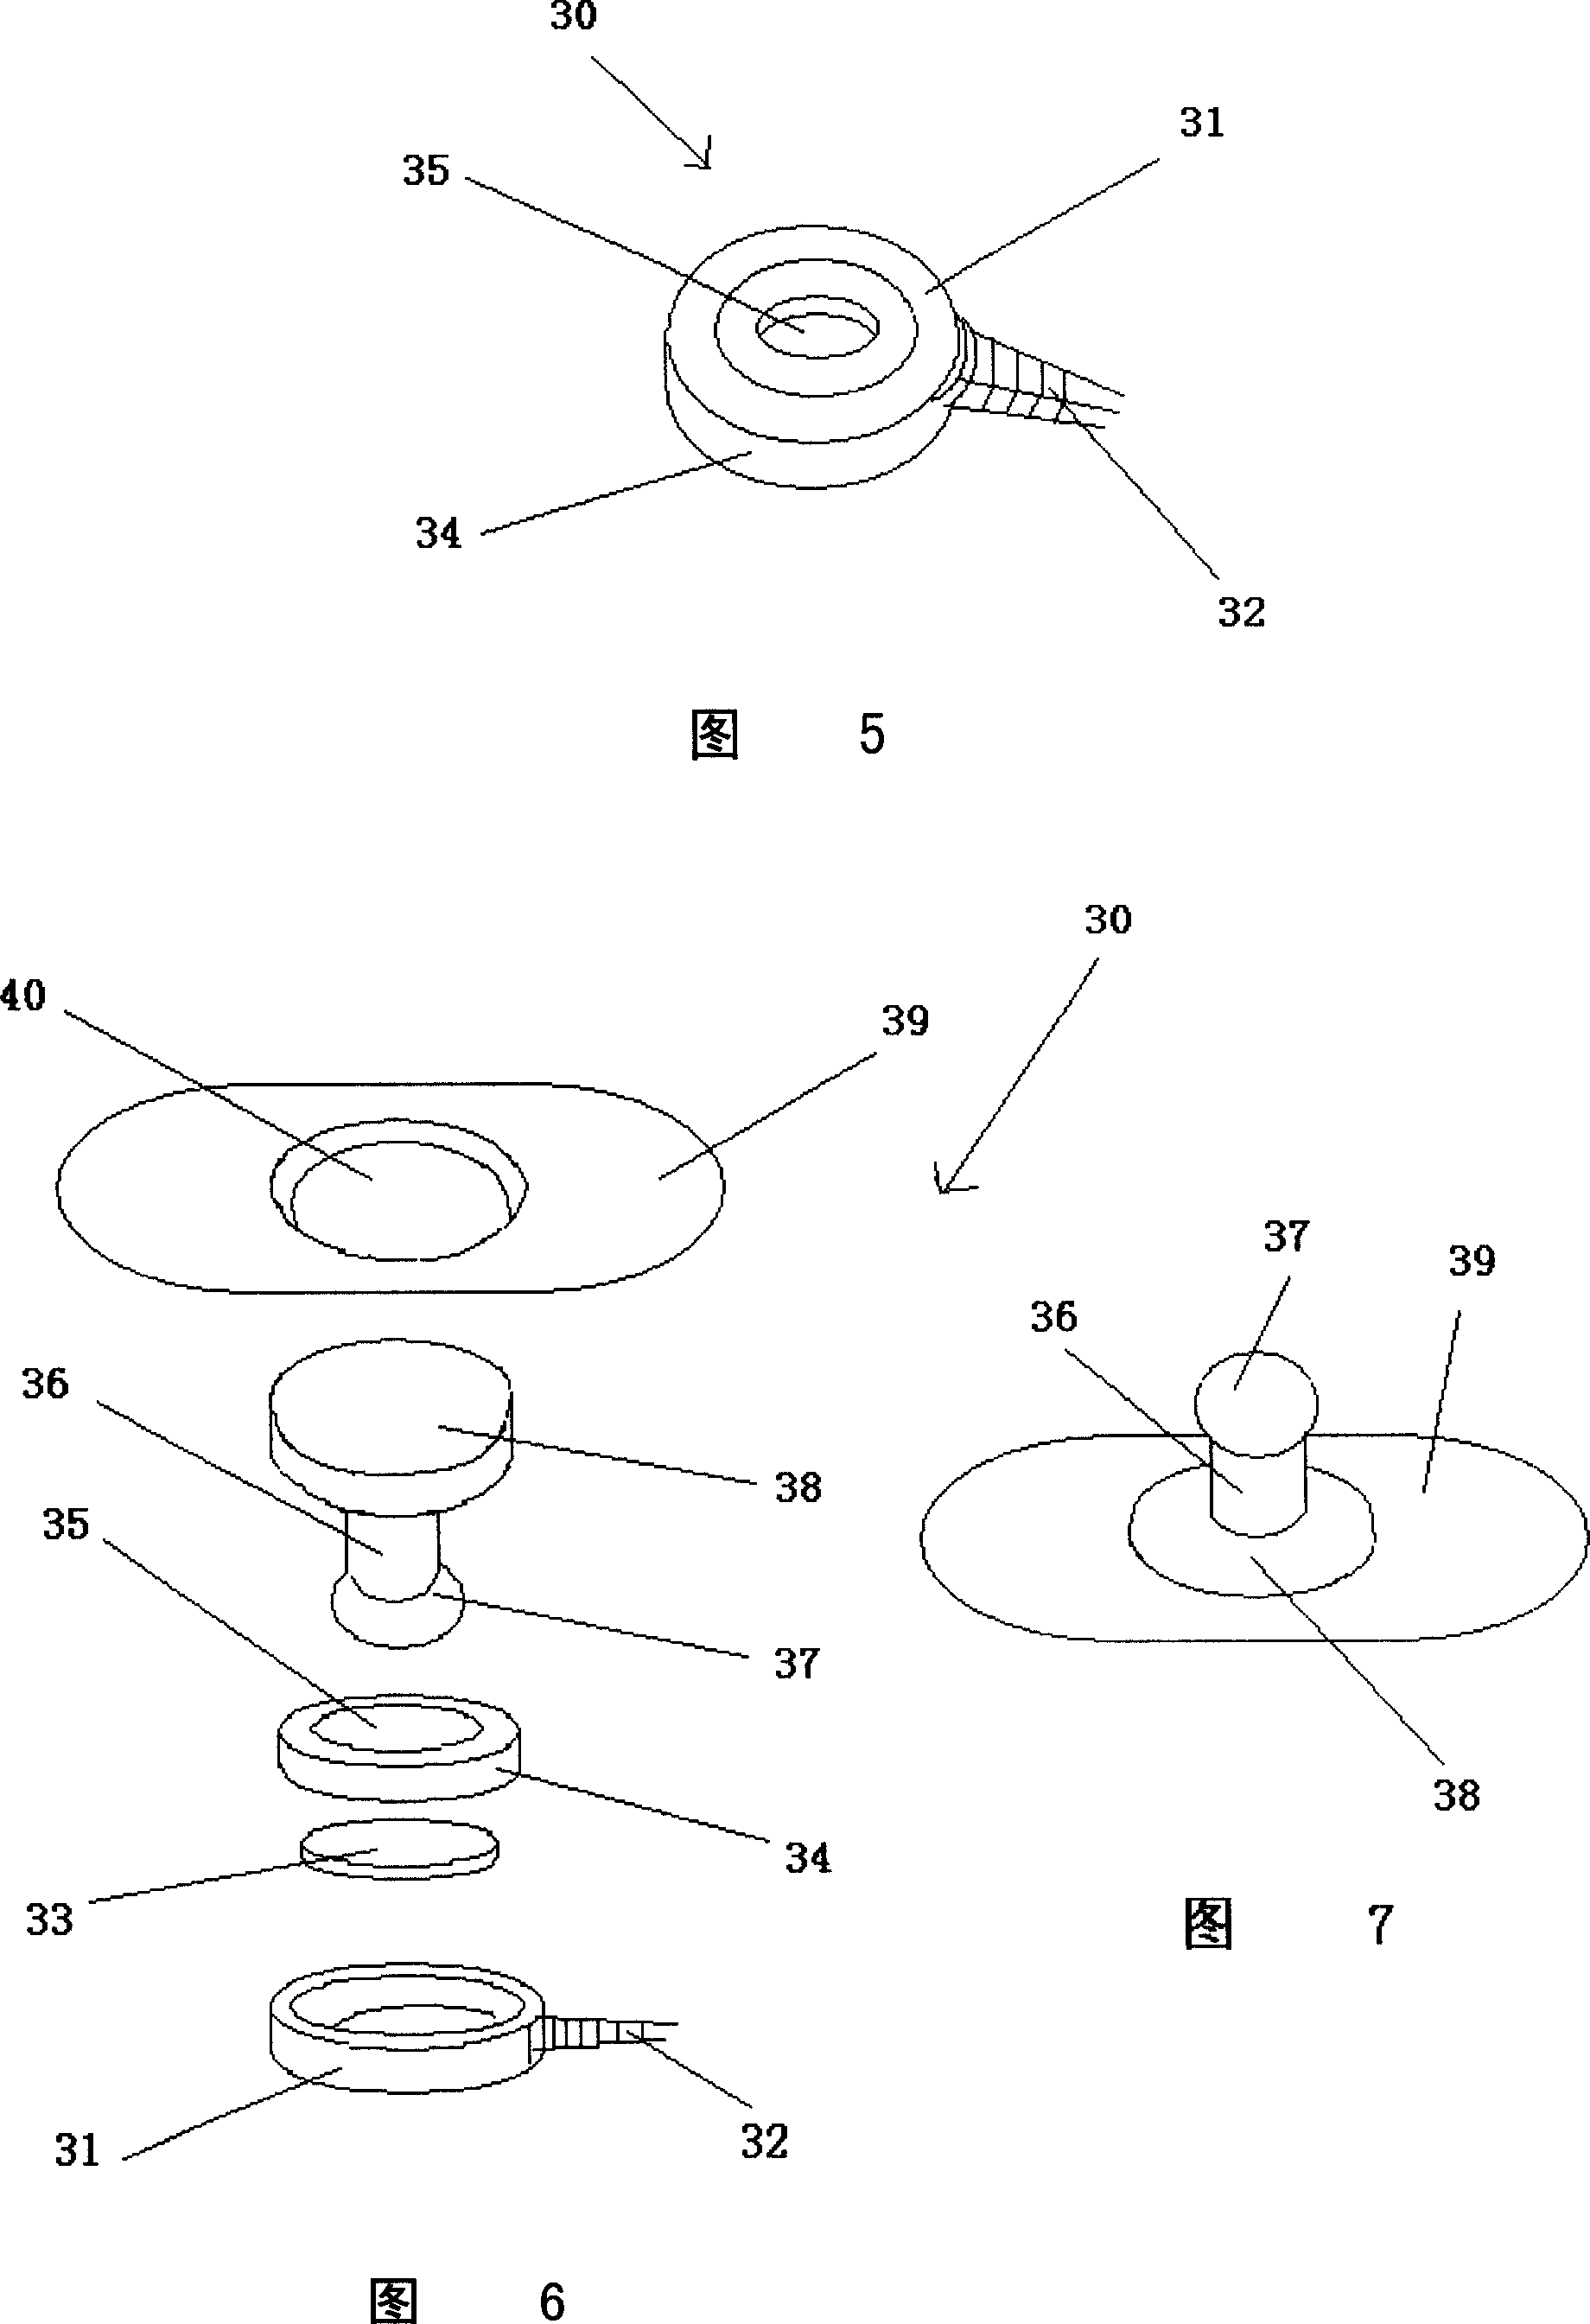 A physiological electrical signal collection device